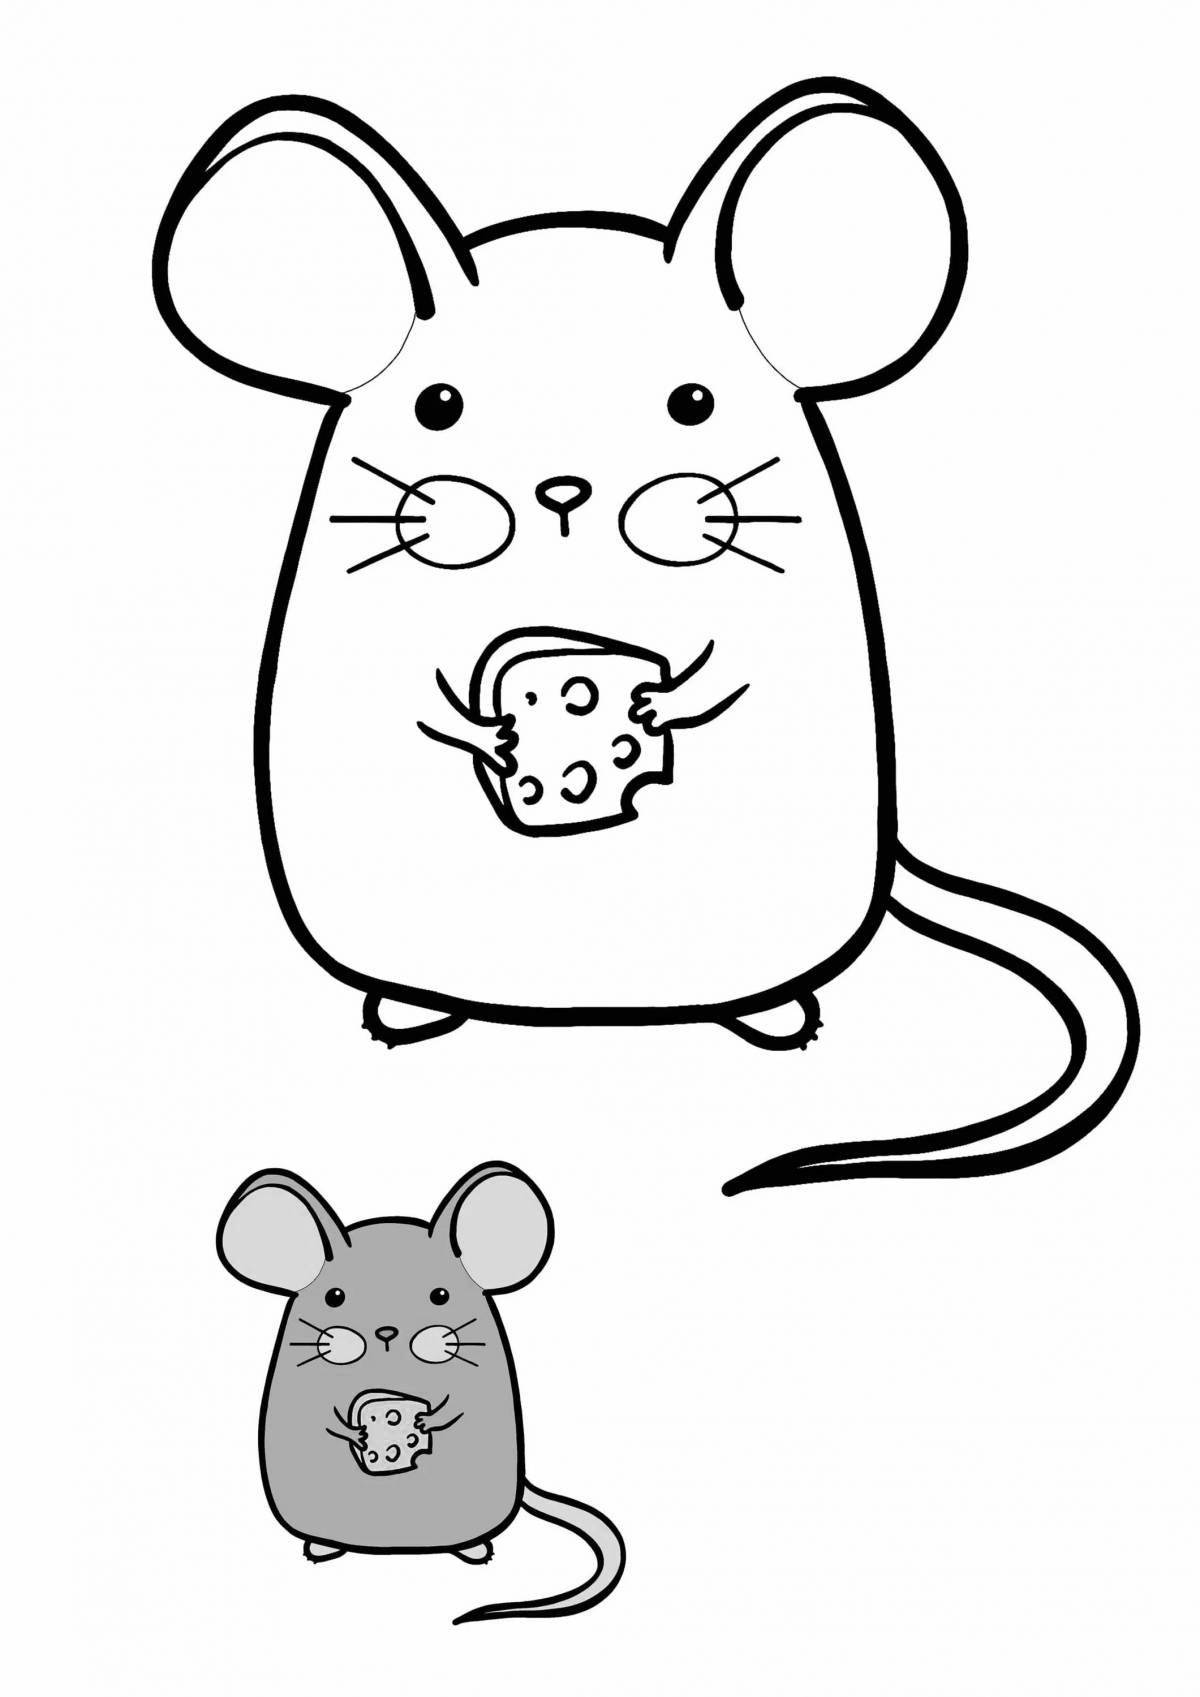 Fun mouse coloring pages